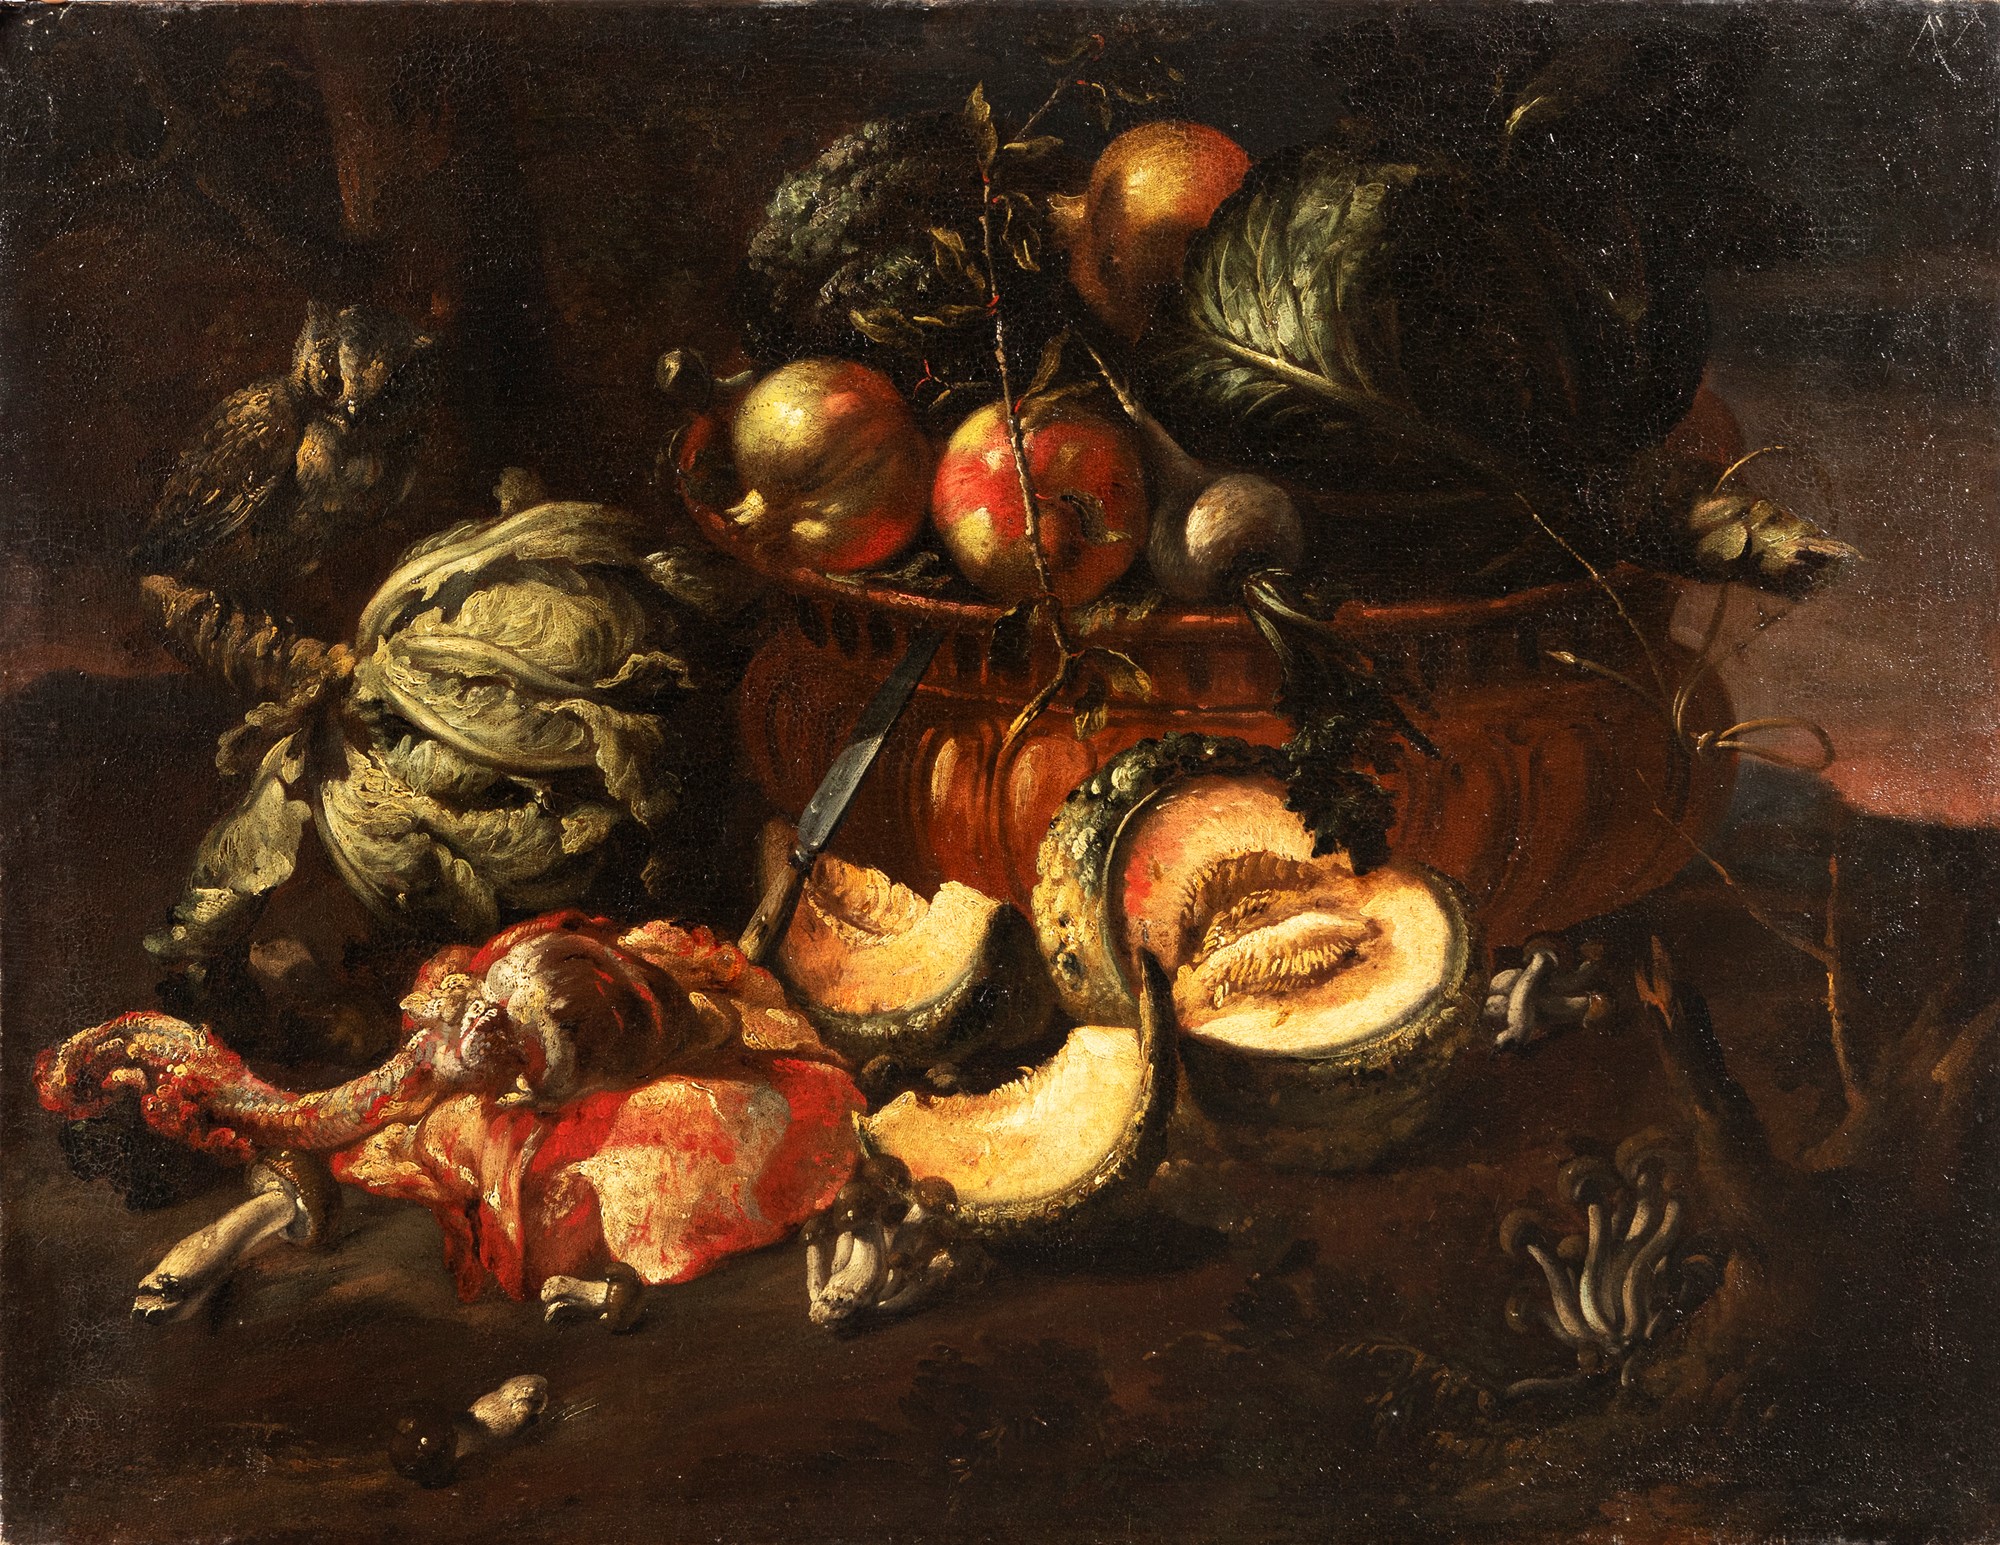 Felice Boselli (Piacenza 1650-Parma 1732) - Entrails, vegetables and fruits with a owl